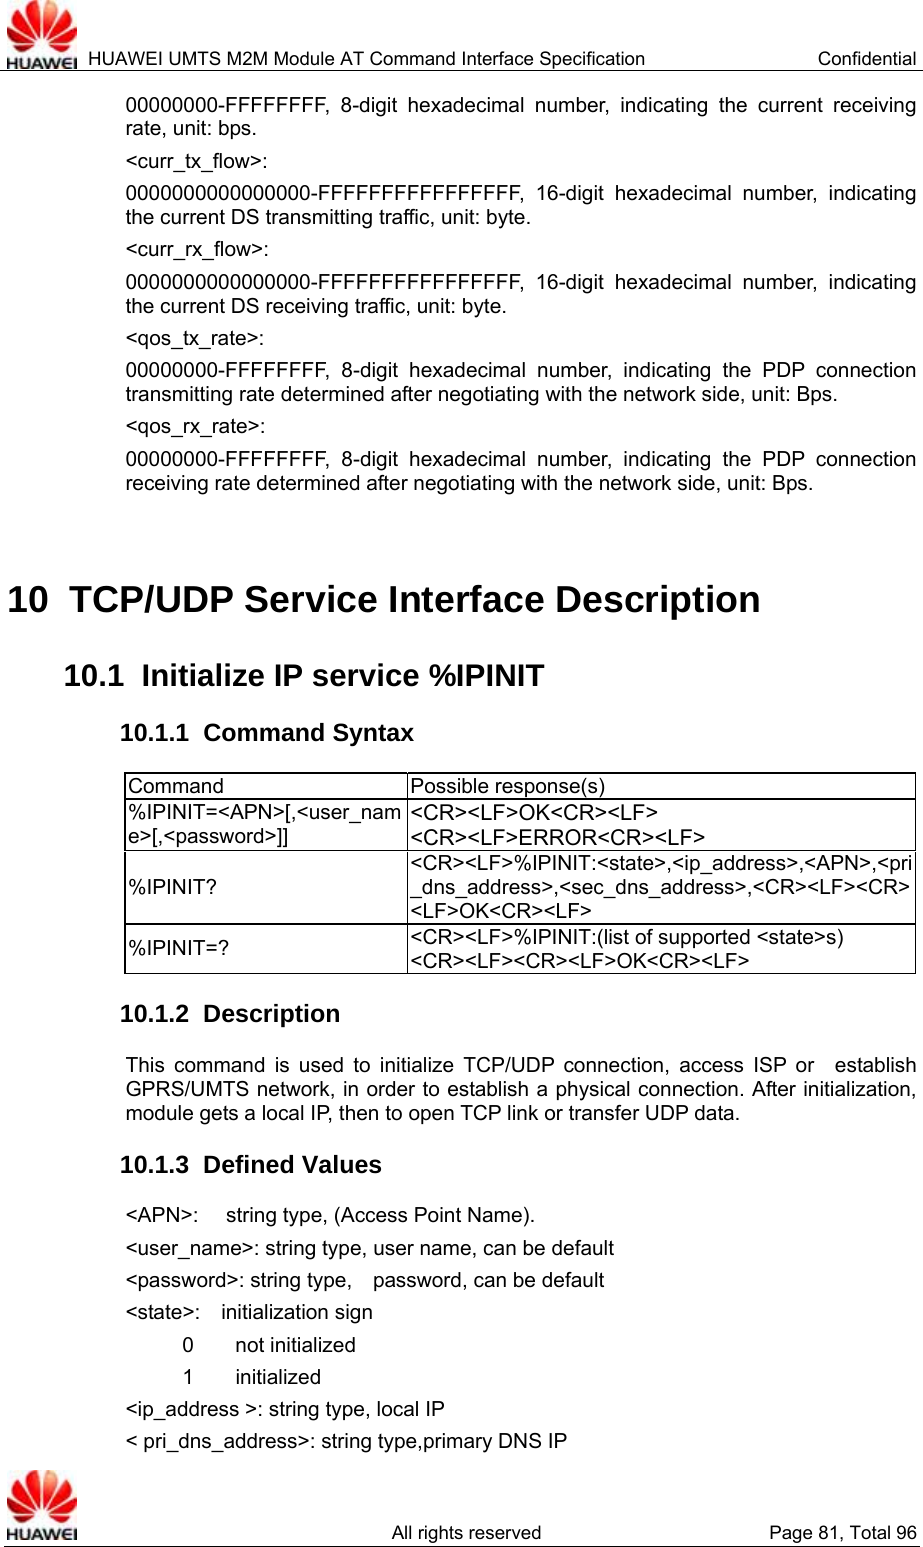  HUAWEI UMTS M2M Module AT Command Interface Specification  Confidential   All rights reserved  Page 81, Total 96 00000000-FFFFFFFF, 8-digit hexadecimal number, indicating the current receiving rate, unit: bps. &lt;curr_tx_flow&gt;:  0000000000000000-FFFFFFFFFFFFFFFF, 16-digit hexadecimal number, indicating the current DS transmitting traffic, unit: byte. &lt;curr_rx_flow&gt;:  0000000000000000-FFFFFFFFFFFFFFFF, 16-digit hexadecimal number, indicating the current DS receiving traffic, unit: byte. &lt;qos_tx_rate&gt;:  00000000-FFFFFFFF, 8-digit hexadecimal number, indicating the PDP connection transmitting rate determined after negotiating with the network side, unit: Bps. &lt;qos_rx_rate&gt;:  00000000-FFFFFFFF, 8-digit hexadecimal number, indicating the PDP connection receiving rate determined after negotiating with the network side, unit: Bps.  10  TCP/UDP Service Interface Description 10.1  Initialize IP service %IPINIT 10.1.1  Command Syntax Command Possible response(s) %IPINIT=&lt;APN&gt;[,&lt;user_name&gt;[,&lt;password&gt;]] &lt;CR&gt;&lt;LF&gt;OK&lt;CR&gt;&lt;LF&gt; &lt;CR&gt;&lt;LF&gt;ERROR&lt;CR&gt;&lt;LF&gt; %IPINIT? &lt;CR&gt;&lt;LF&gt;%IPINIT:&lt;state&gt;,&lt;ip_address&gt;,&lt;APN&gt;,&lt;pri_dns_address&gt;,&lt;sec_dns_address&gt;,&lt;CR&gt;&lt;LF&gt;&lt;CR&gt;&lt;LF&gt;OK&lt;CR&gt;&lt;LF&gt; %IPINIT=?  &lt;CR&gt;&lt;LF&gt;%IPINIT:(list of supported &lt;state&gt;s) &lt;CR&gt;&lt;LF&gt;&lt;CR&gt;&lt;LF&gt;OK&lt;CR&gt;&lt;LF&gt; 10.1.2  Description This command is used to initialize TCP/UDP connection, access ISP or  establish GPRS/UMTS network, in order to establish a physical connection. After initialization, module gets a local IP, then to open TCP link or transfer UDP data. 10.1.3  Defined Values &lt;APN&gt;:  string type, (Access Point Name). &lt;user_name&gt;: string type, user name, can be default &lt;password&gt;: string type,    password, can be default &lt;state&gt;:  initialization sign     0    not initialized     1    initialized &lt;ip_address &gt;: string type, local IP &lt; pri_dns_address&gt;: string type,primary DNS IP 